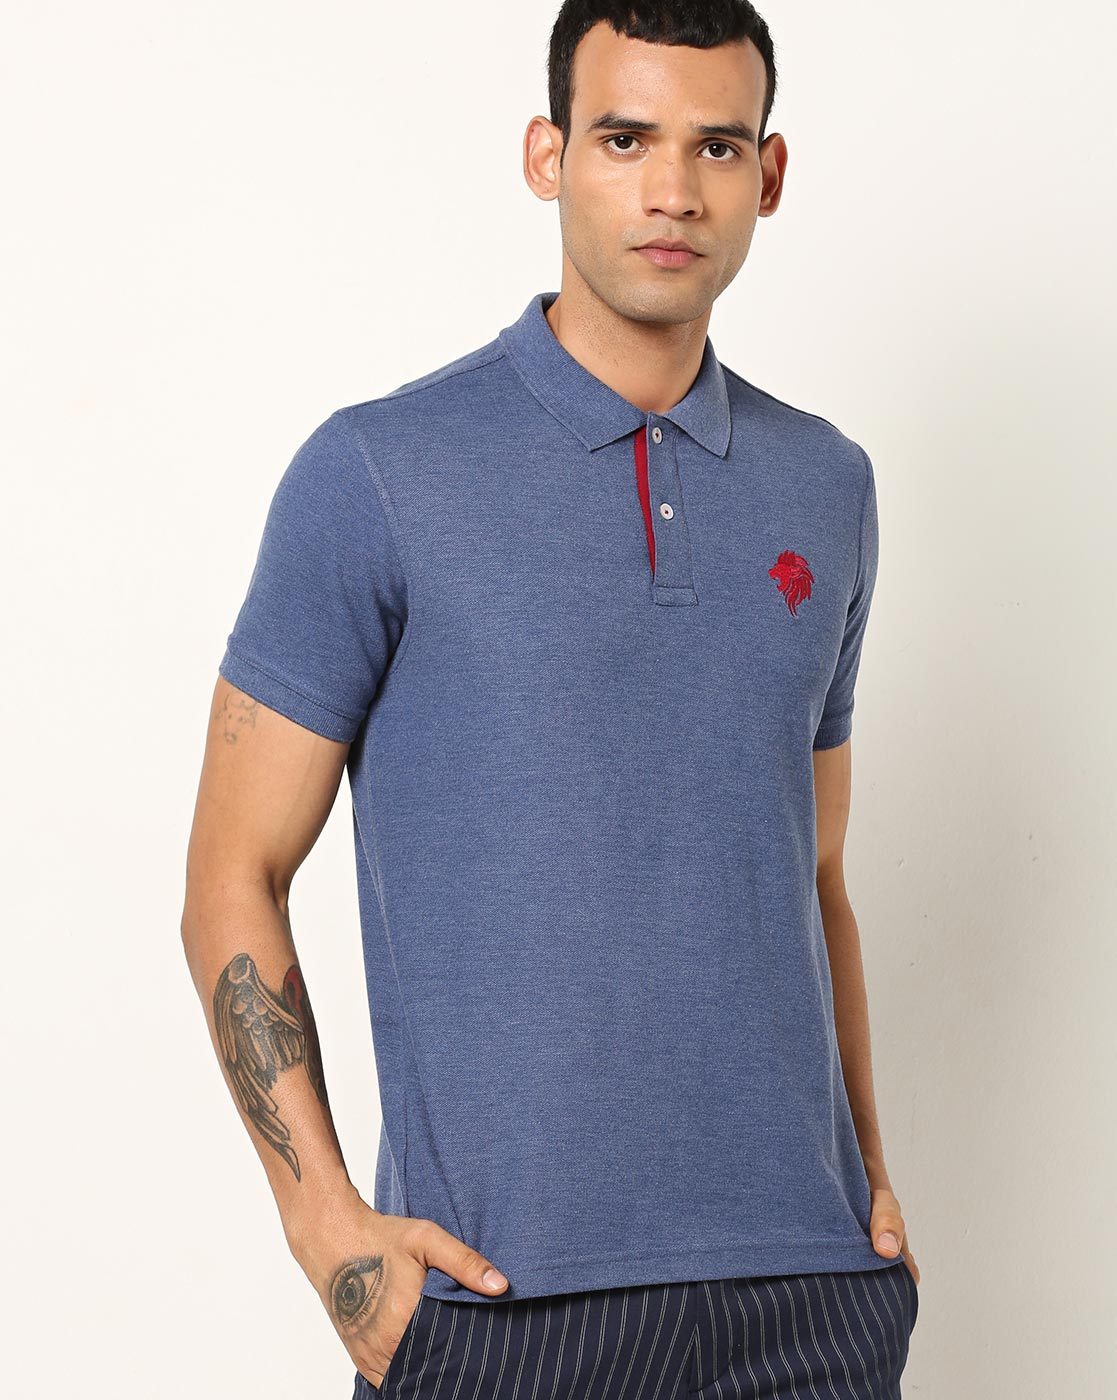 SS Super Polo T-Shirt for Men's and Boys - H/S | SS Cricket